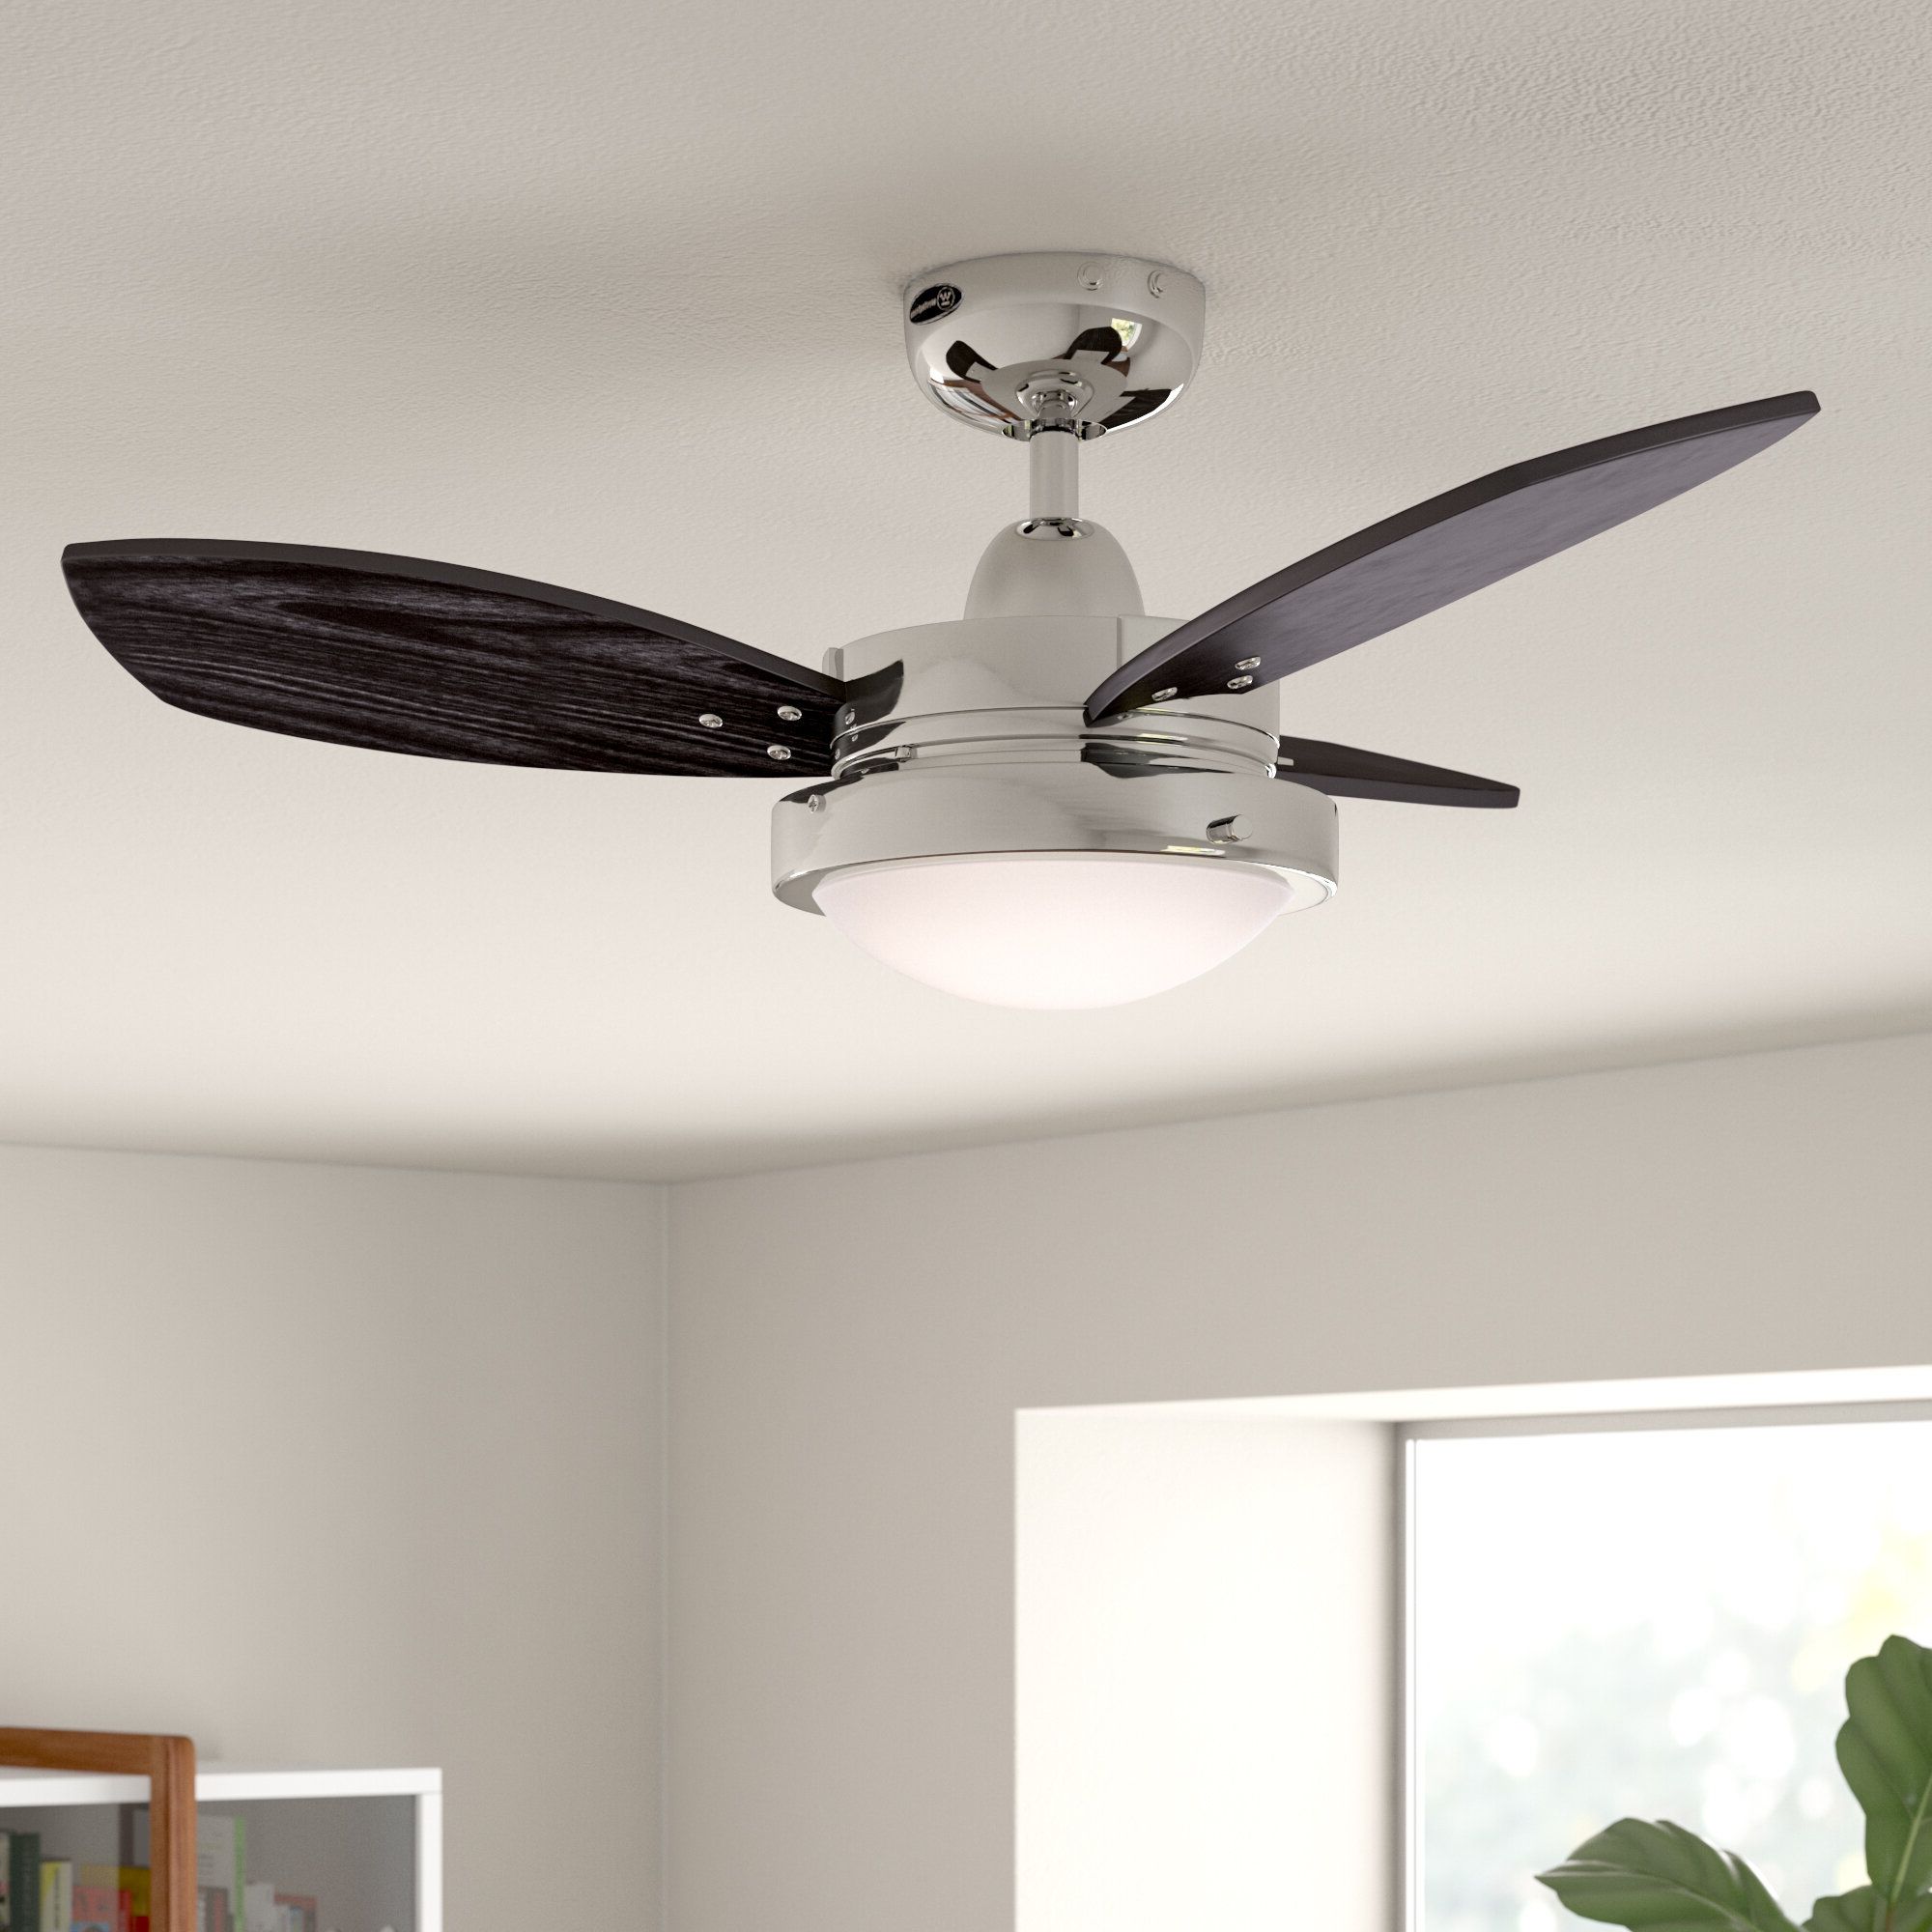 Loki 4 Blade Led Ceiling Fans In Well Liked 30" Heskett 3 Blade Led Ceiling Fan With Light Kit Included (View 16 of 20)